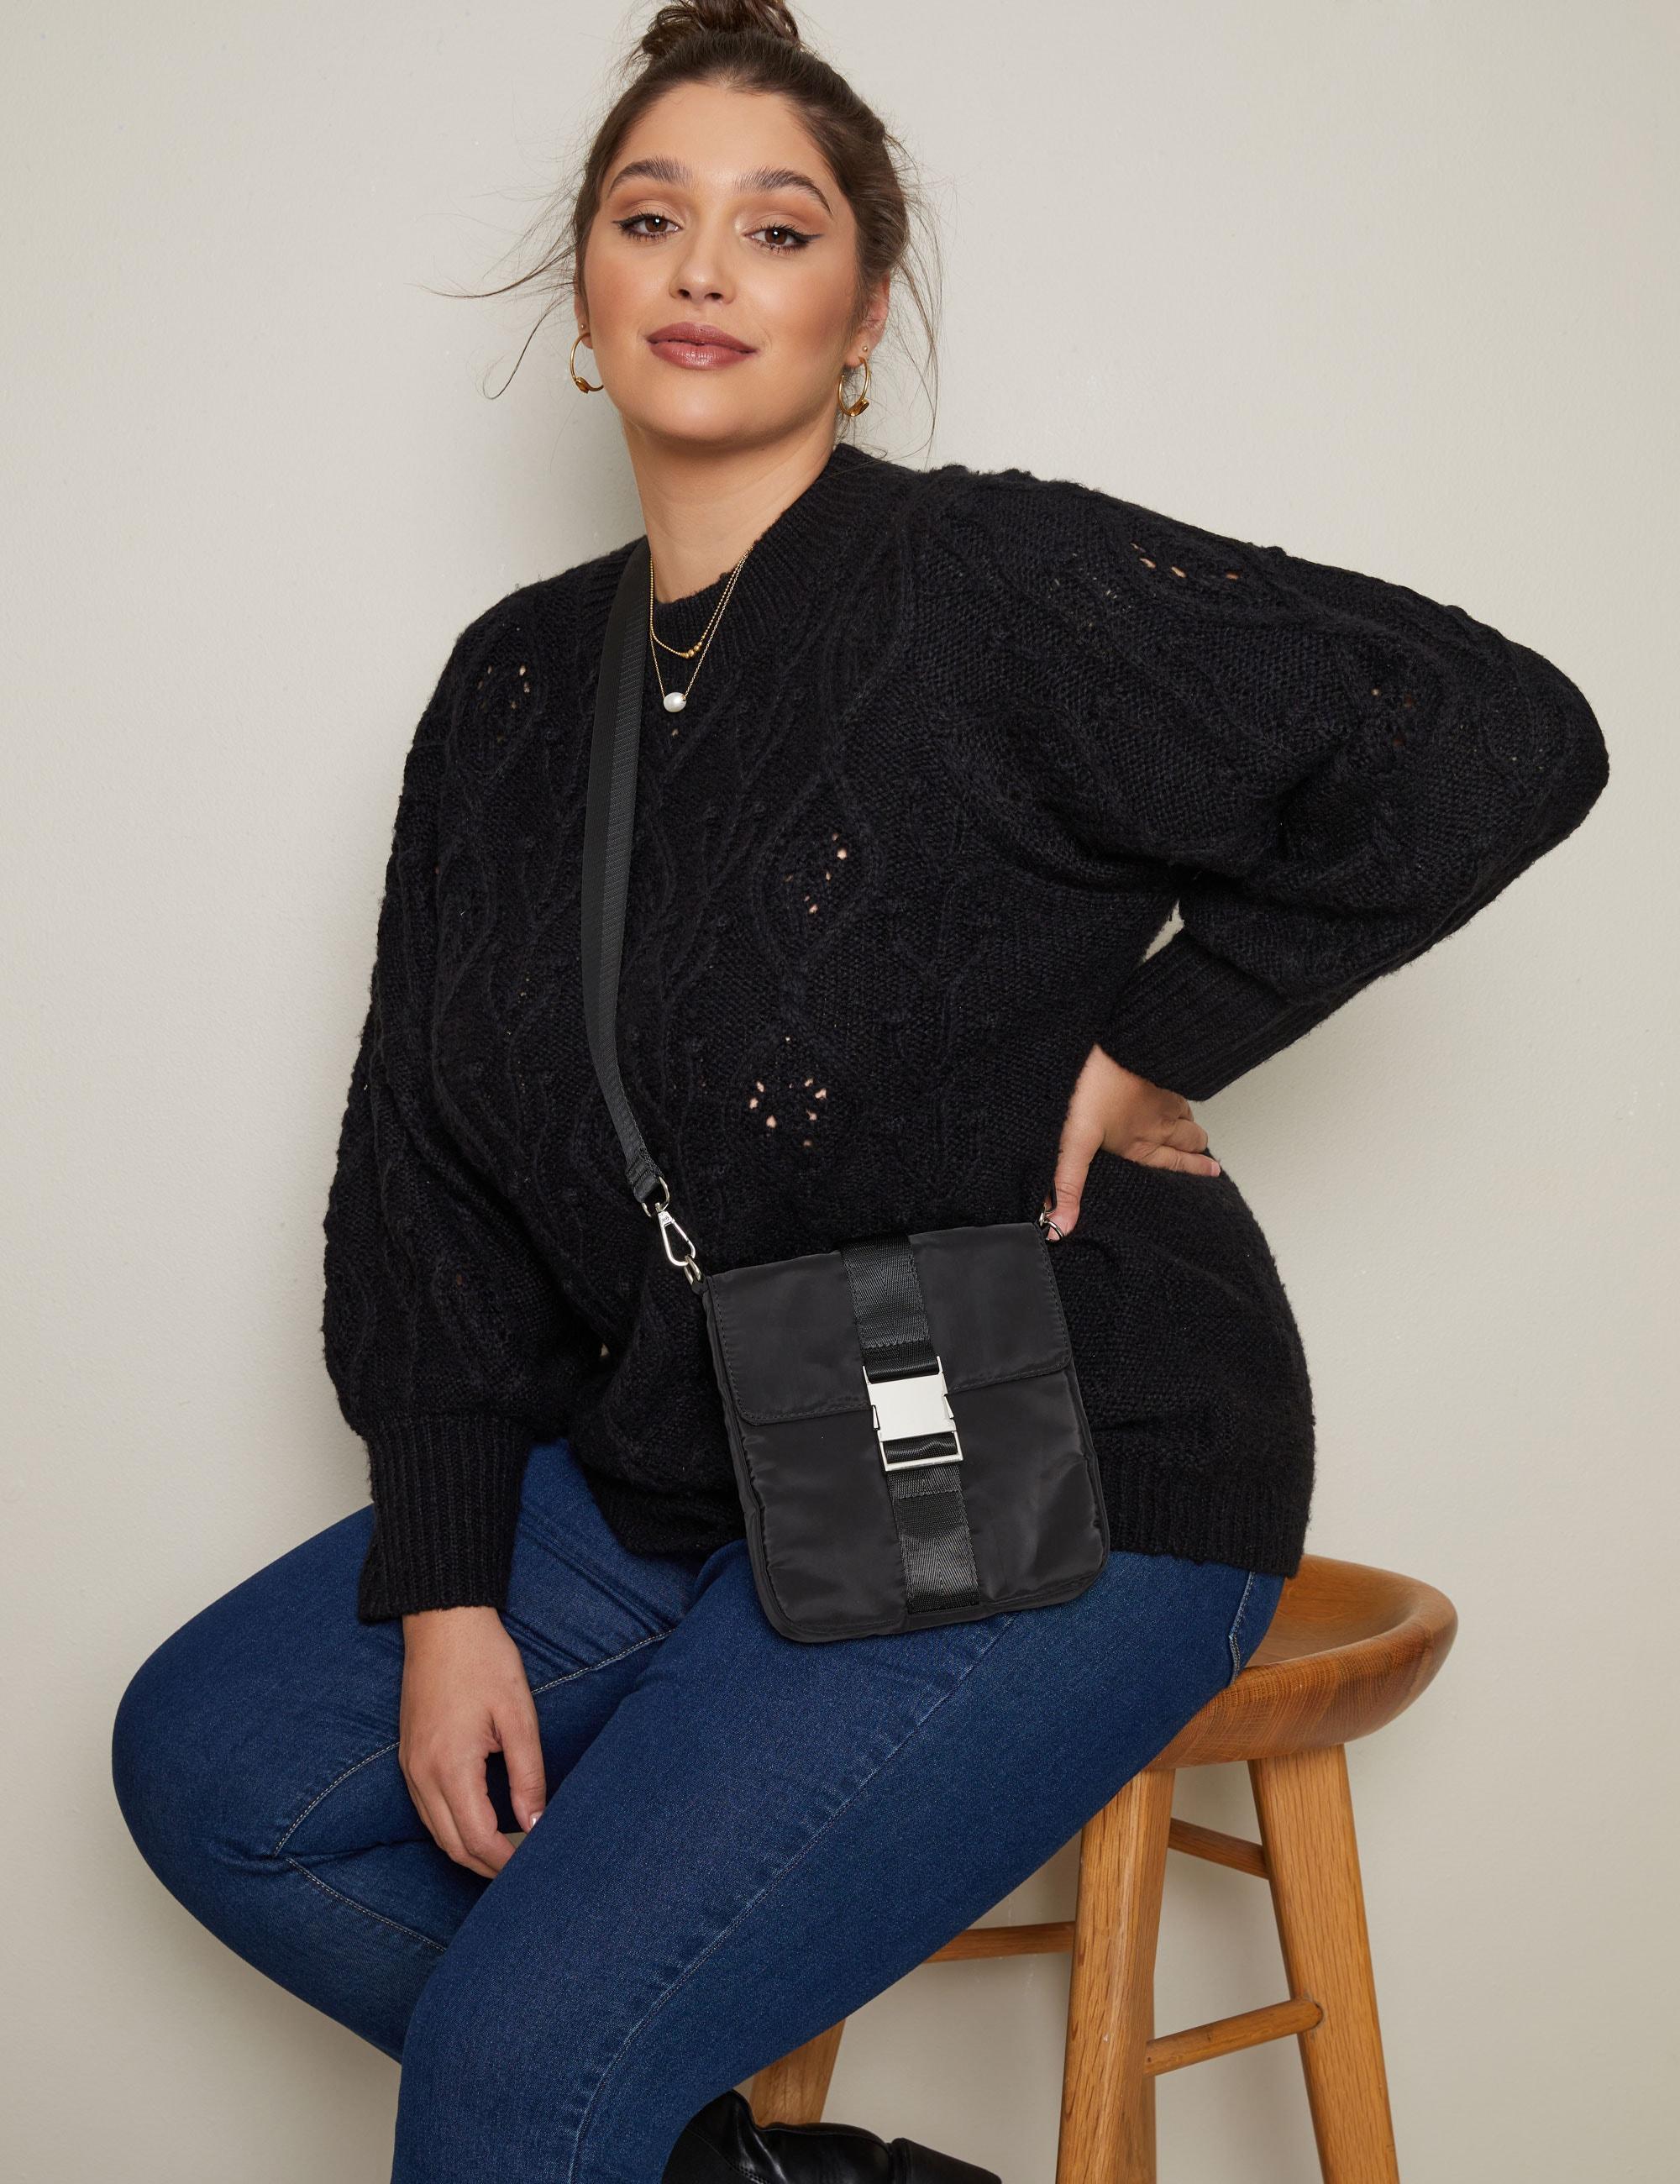 AUTOGRAPH - Plus Size - Womens Jumper - Regular Winter Sweater - Black Pullover - Long Sleeve - High Neck - Cable Knit - Work Wear - Casual Clothing